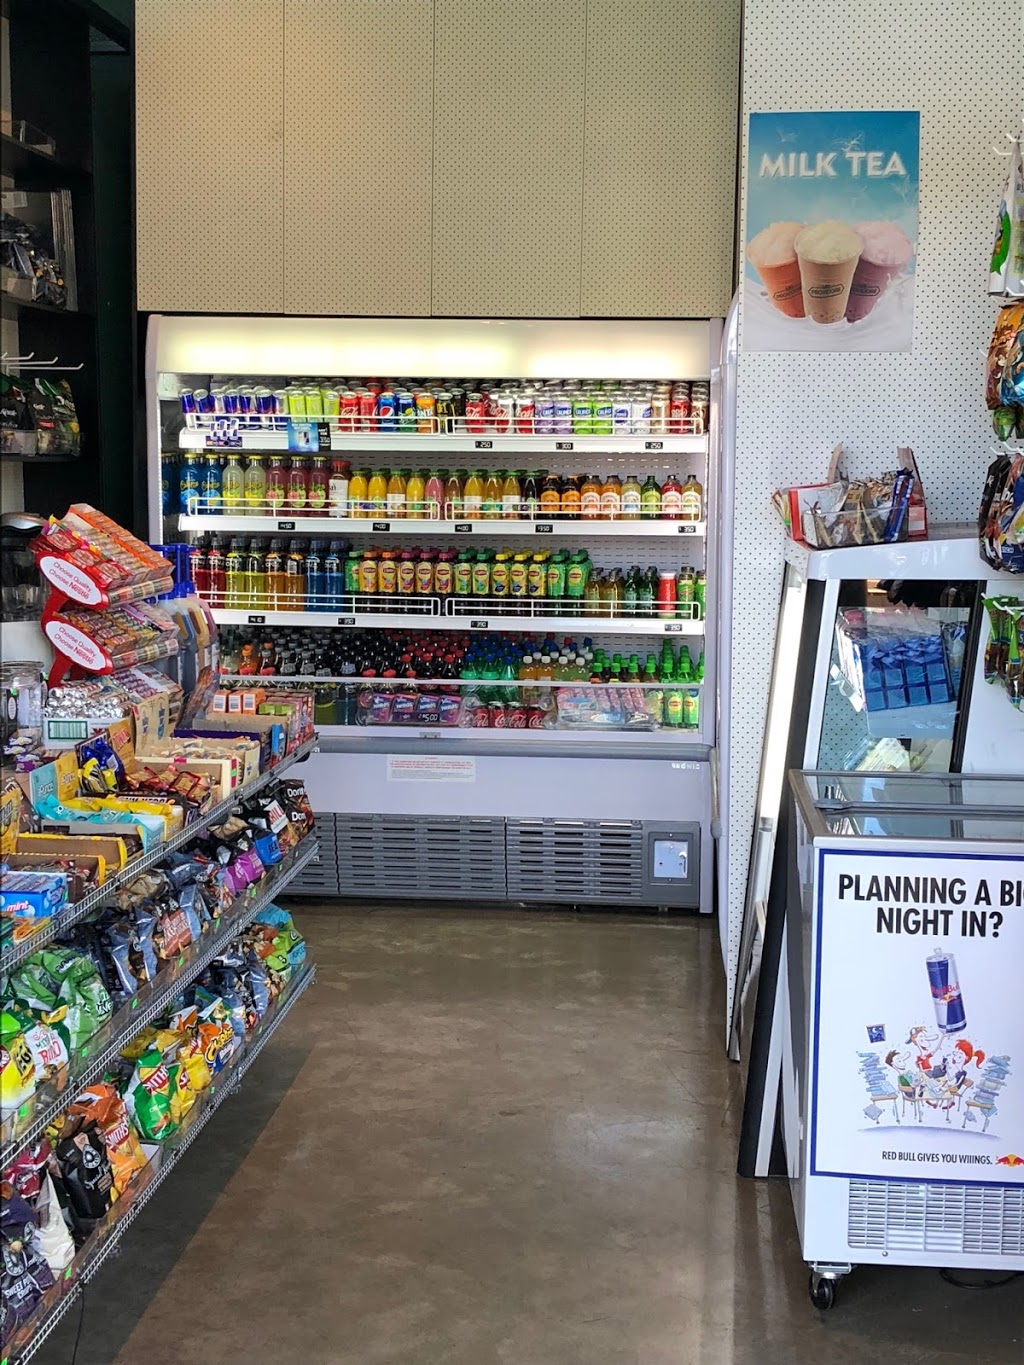 Mr Providore | convenience store | Ground floor, Learning and Teaching Building, Monash University, Clayton VIC 3168, Australia